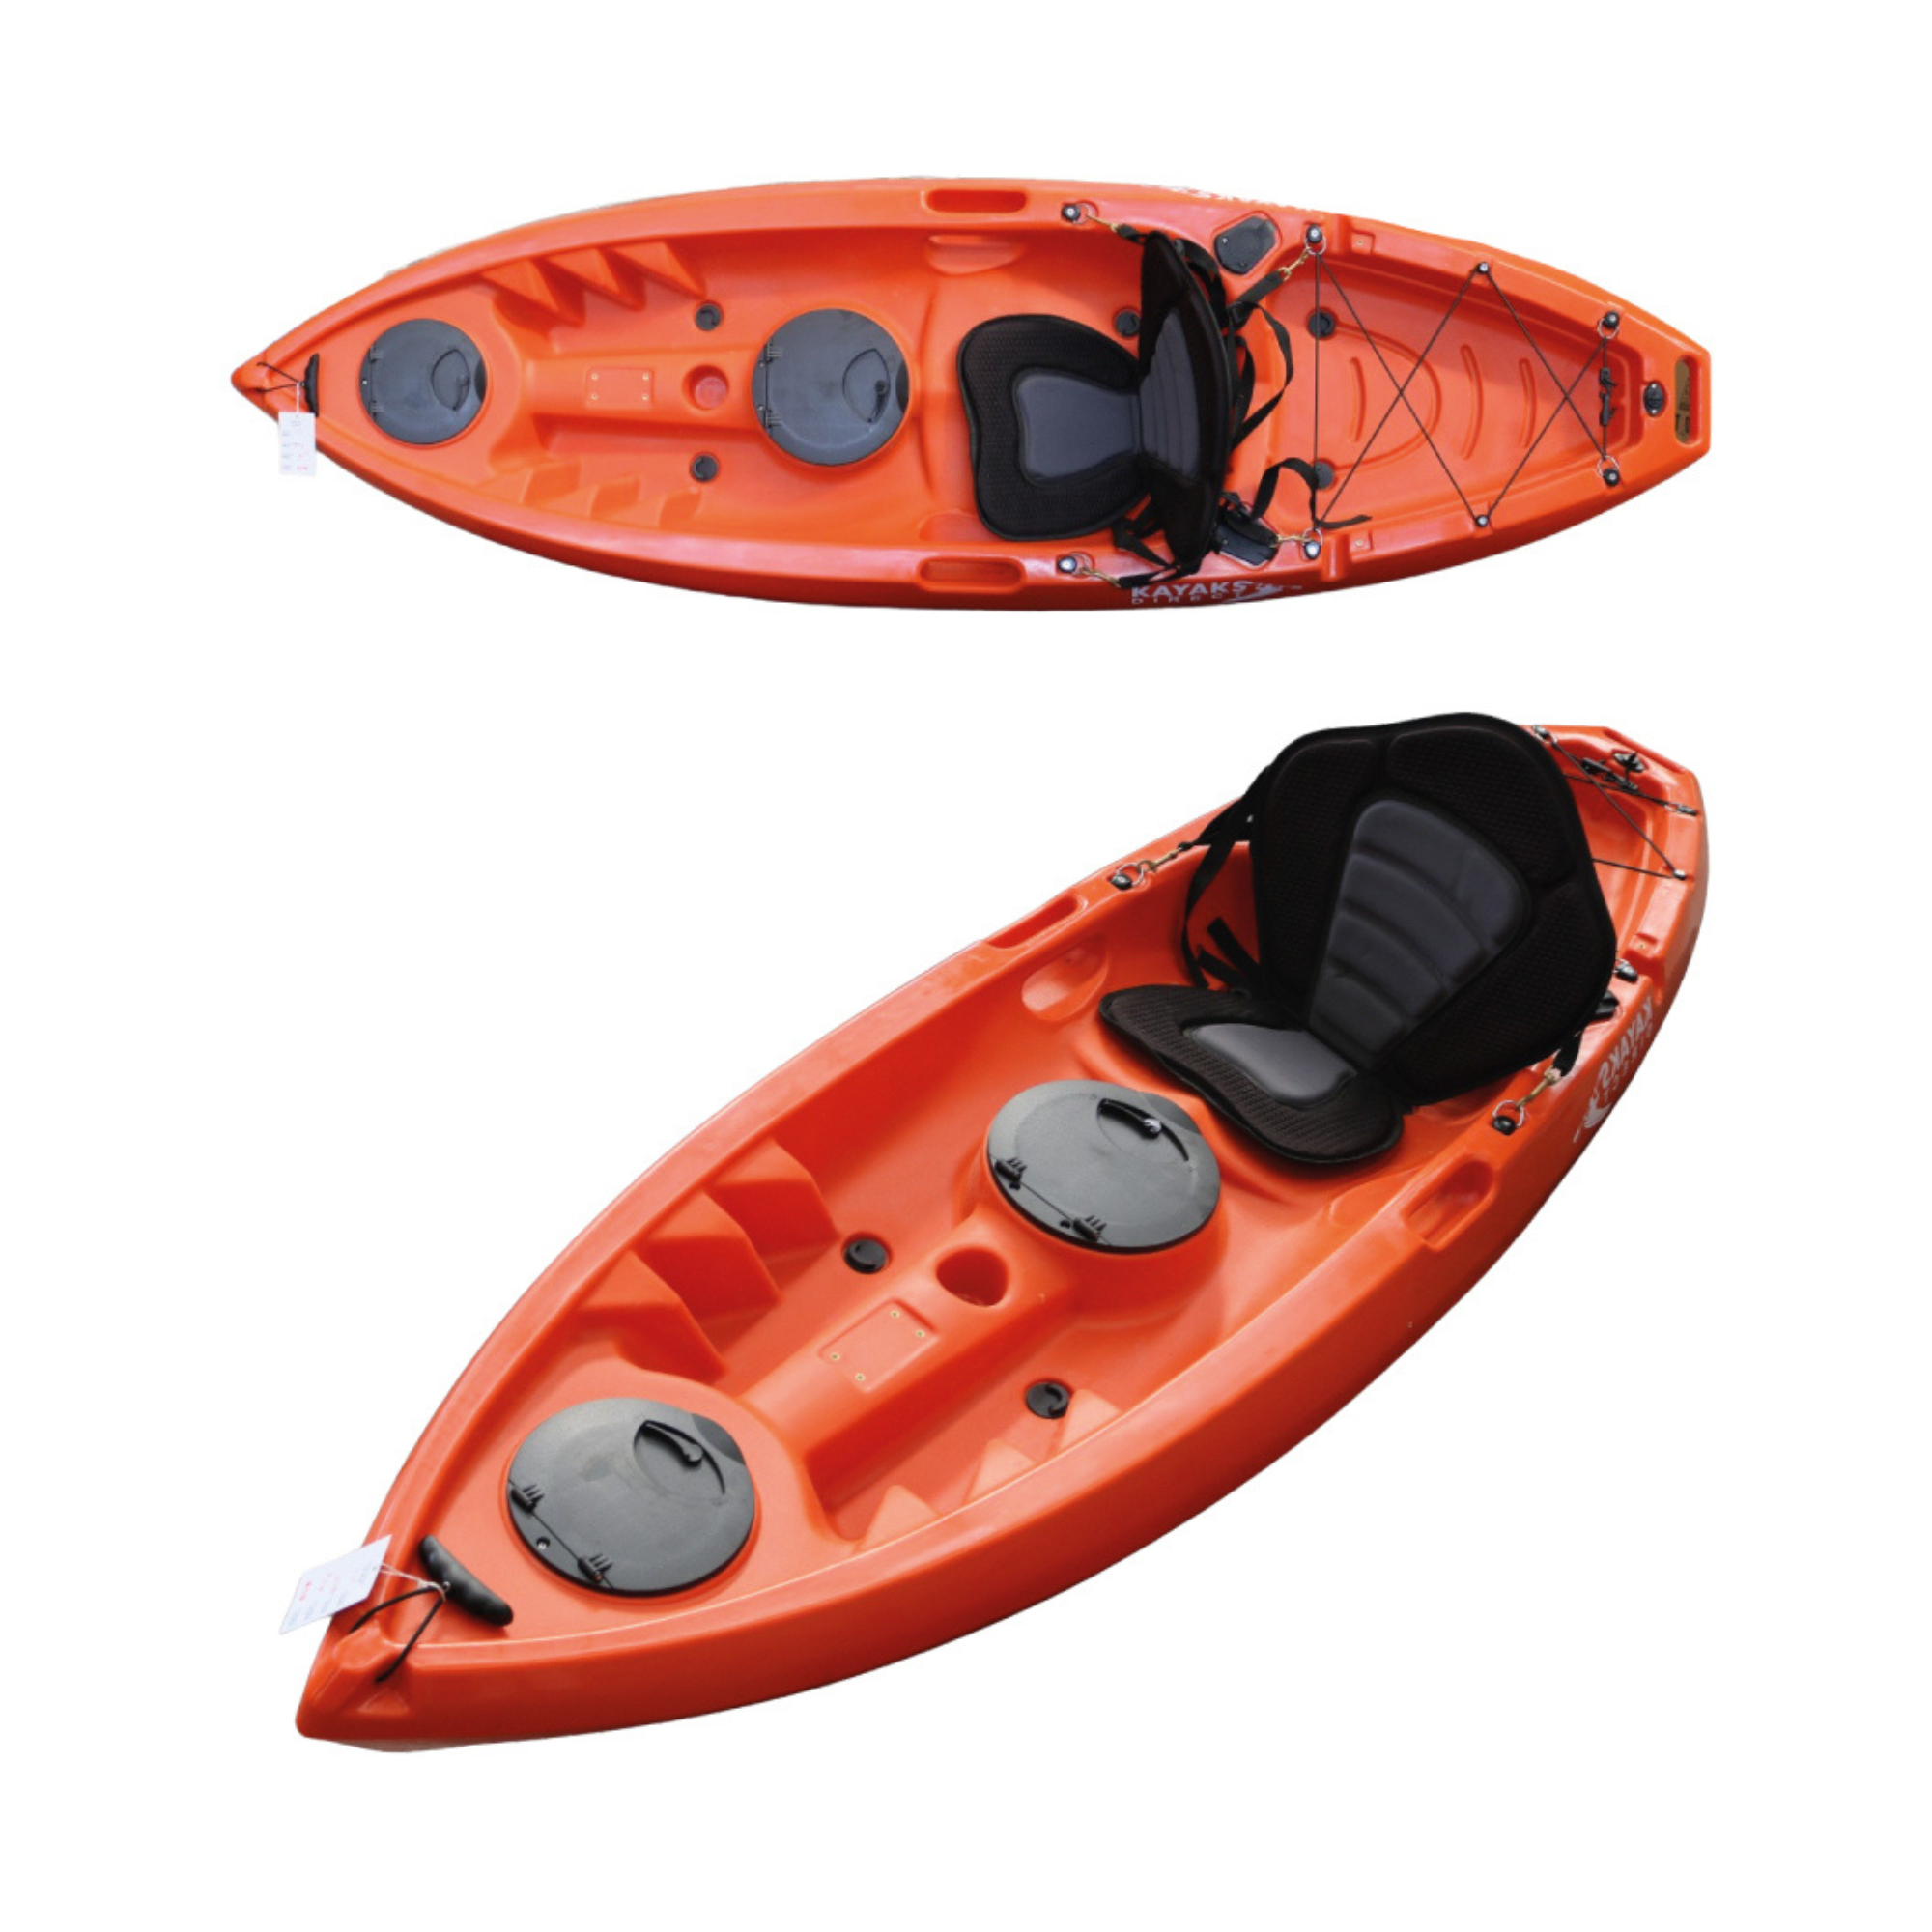 Kayaks for Sale - Quality Sit on Tops by Kayaks Direct Ltd